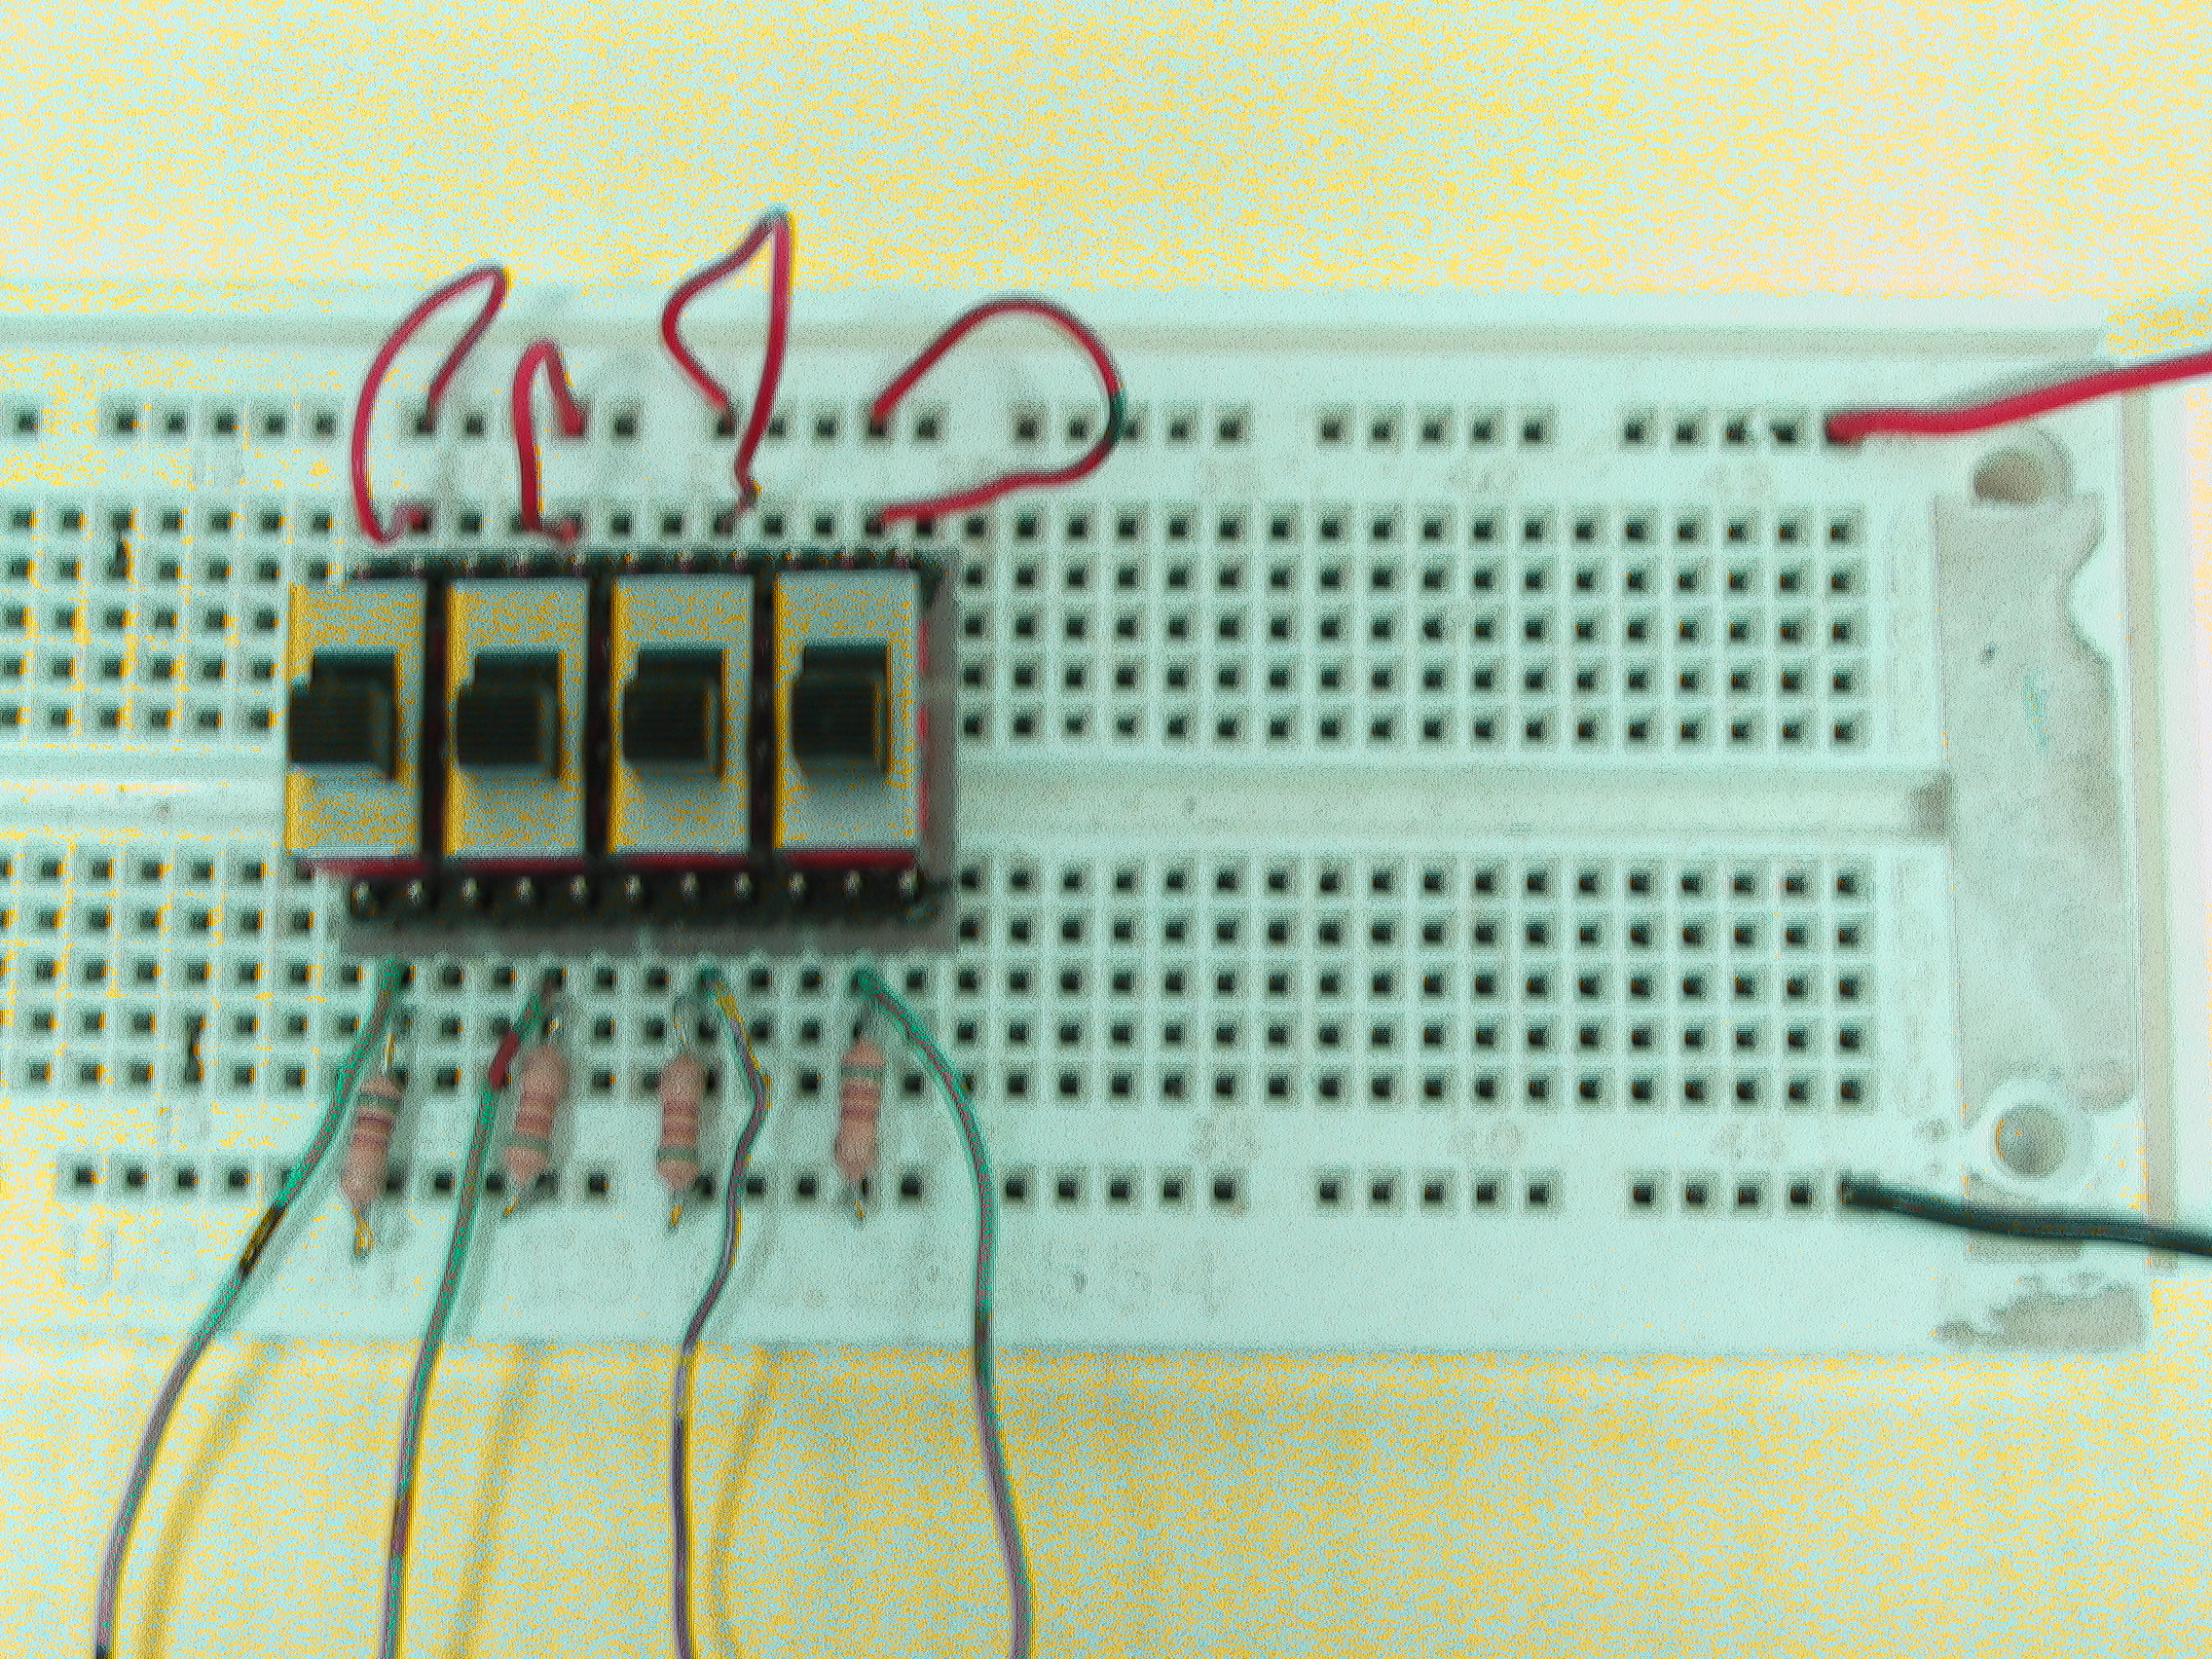 prototype switch with individual resistors (active high) 